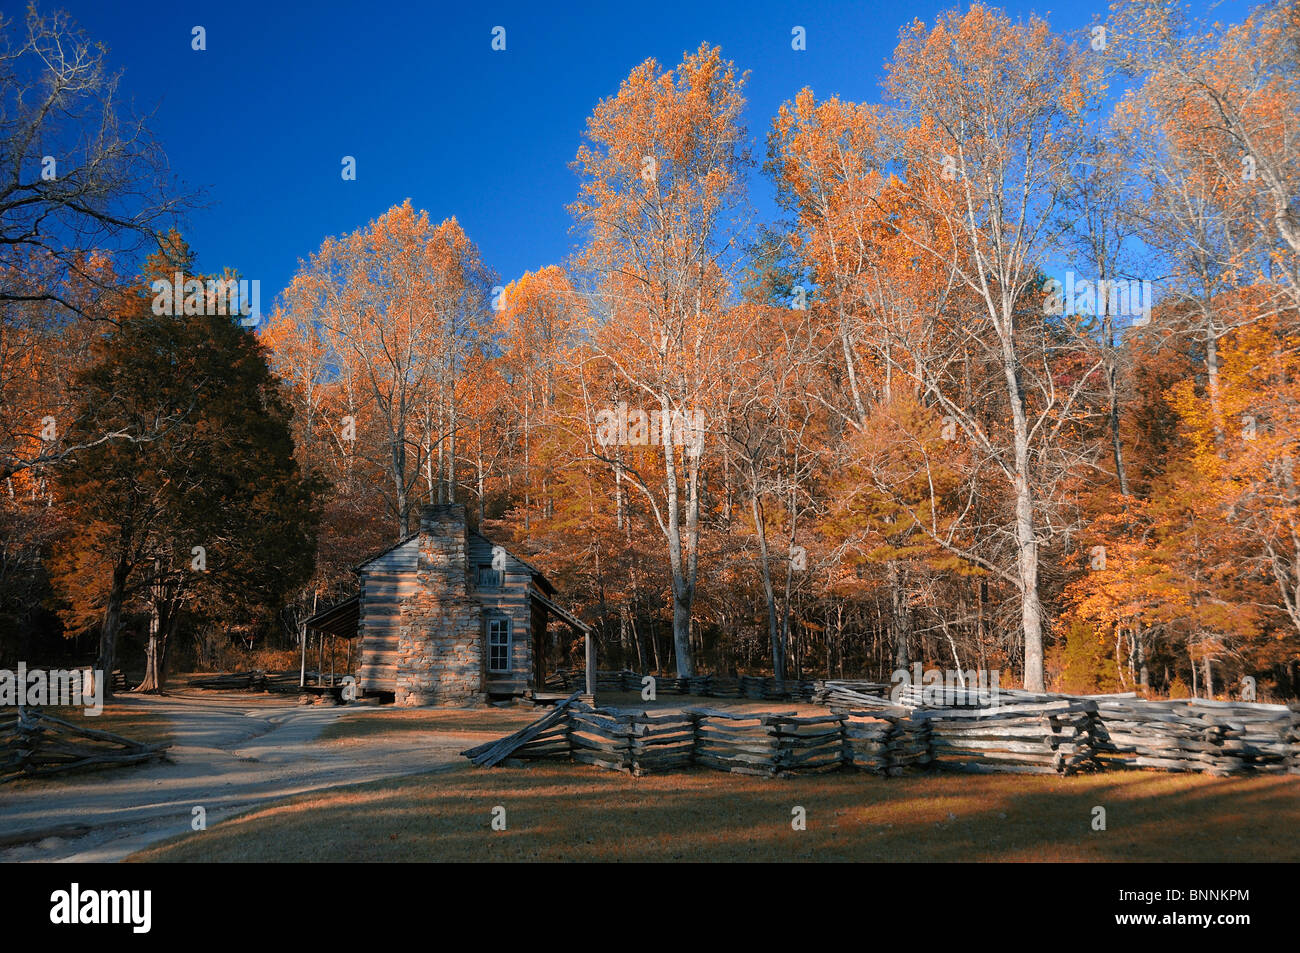 John Oliver Ort Cabin log Haus Cades Cove Herbst Farben Farben Great Smoky Mountains Nationalpark Tennessee USA Stockfoto